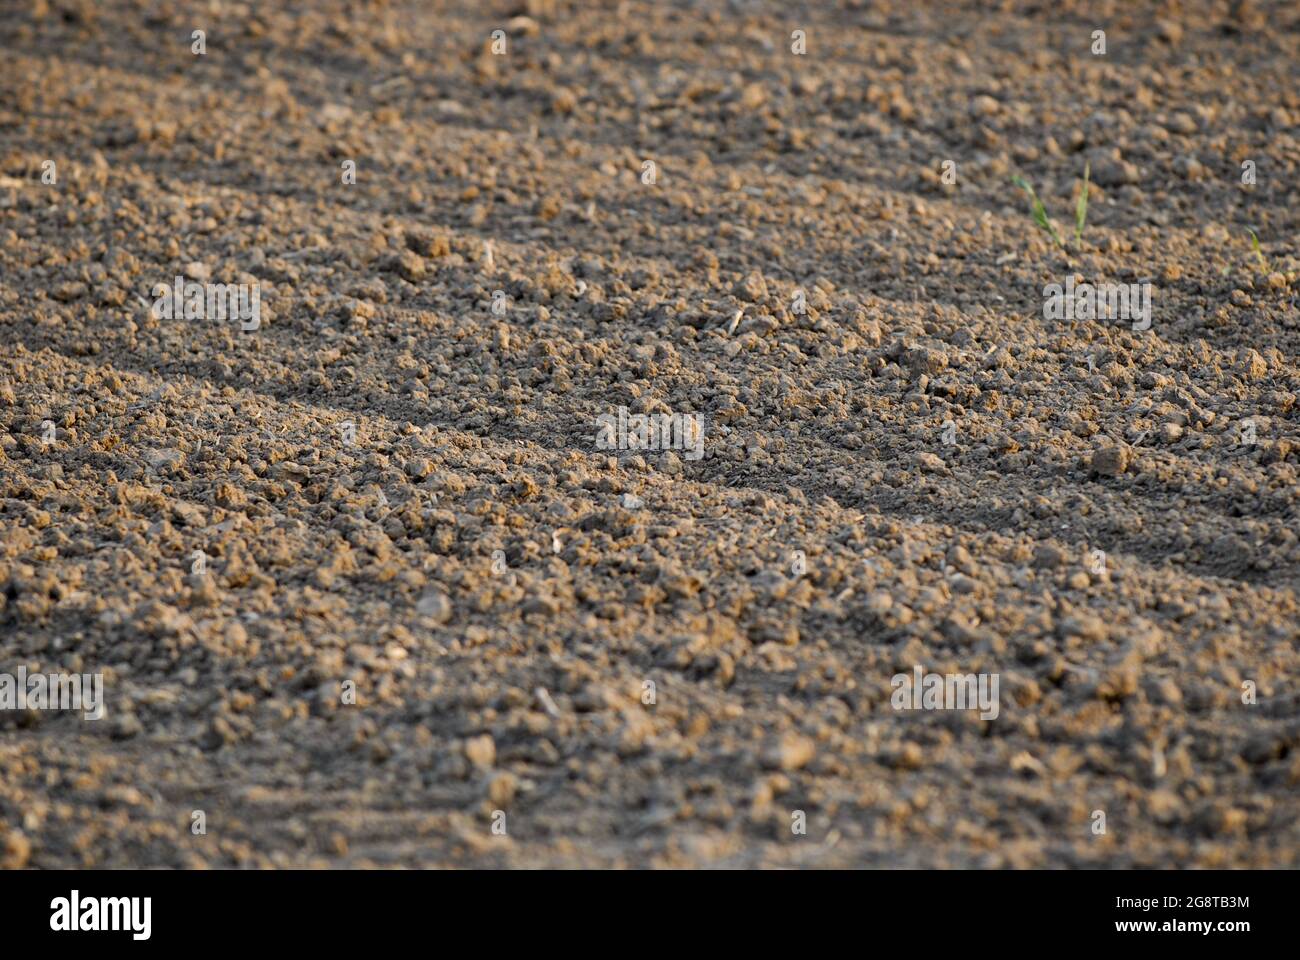 furrows in a field, Germany Stock Photo